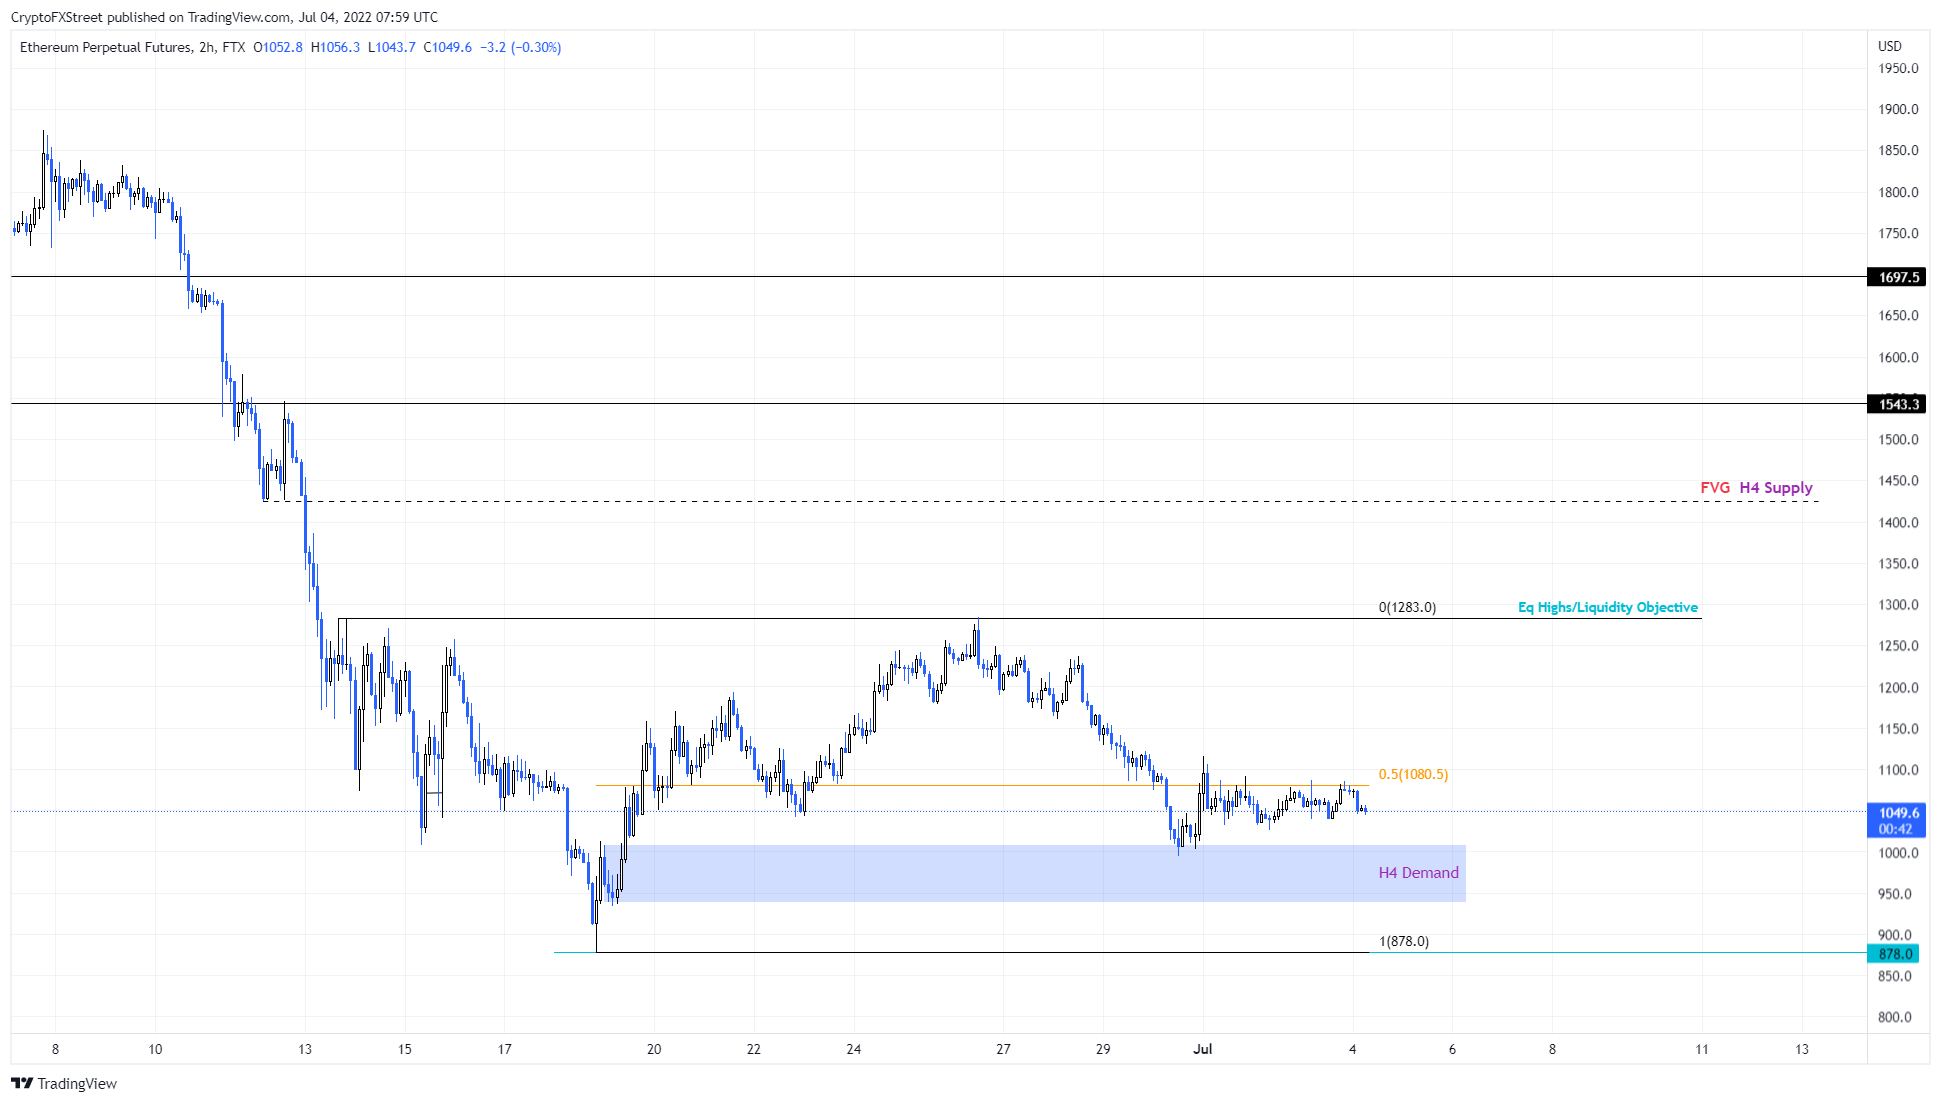 XRP/USD 2-hour chart